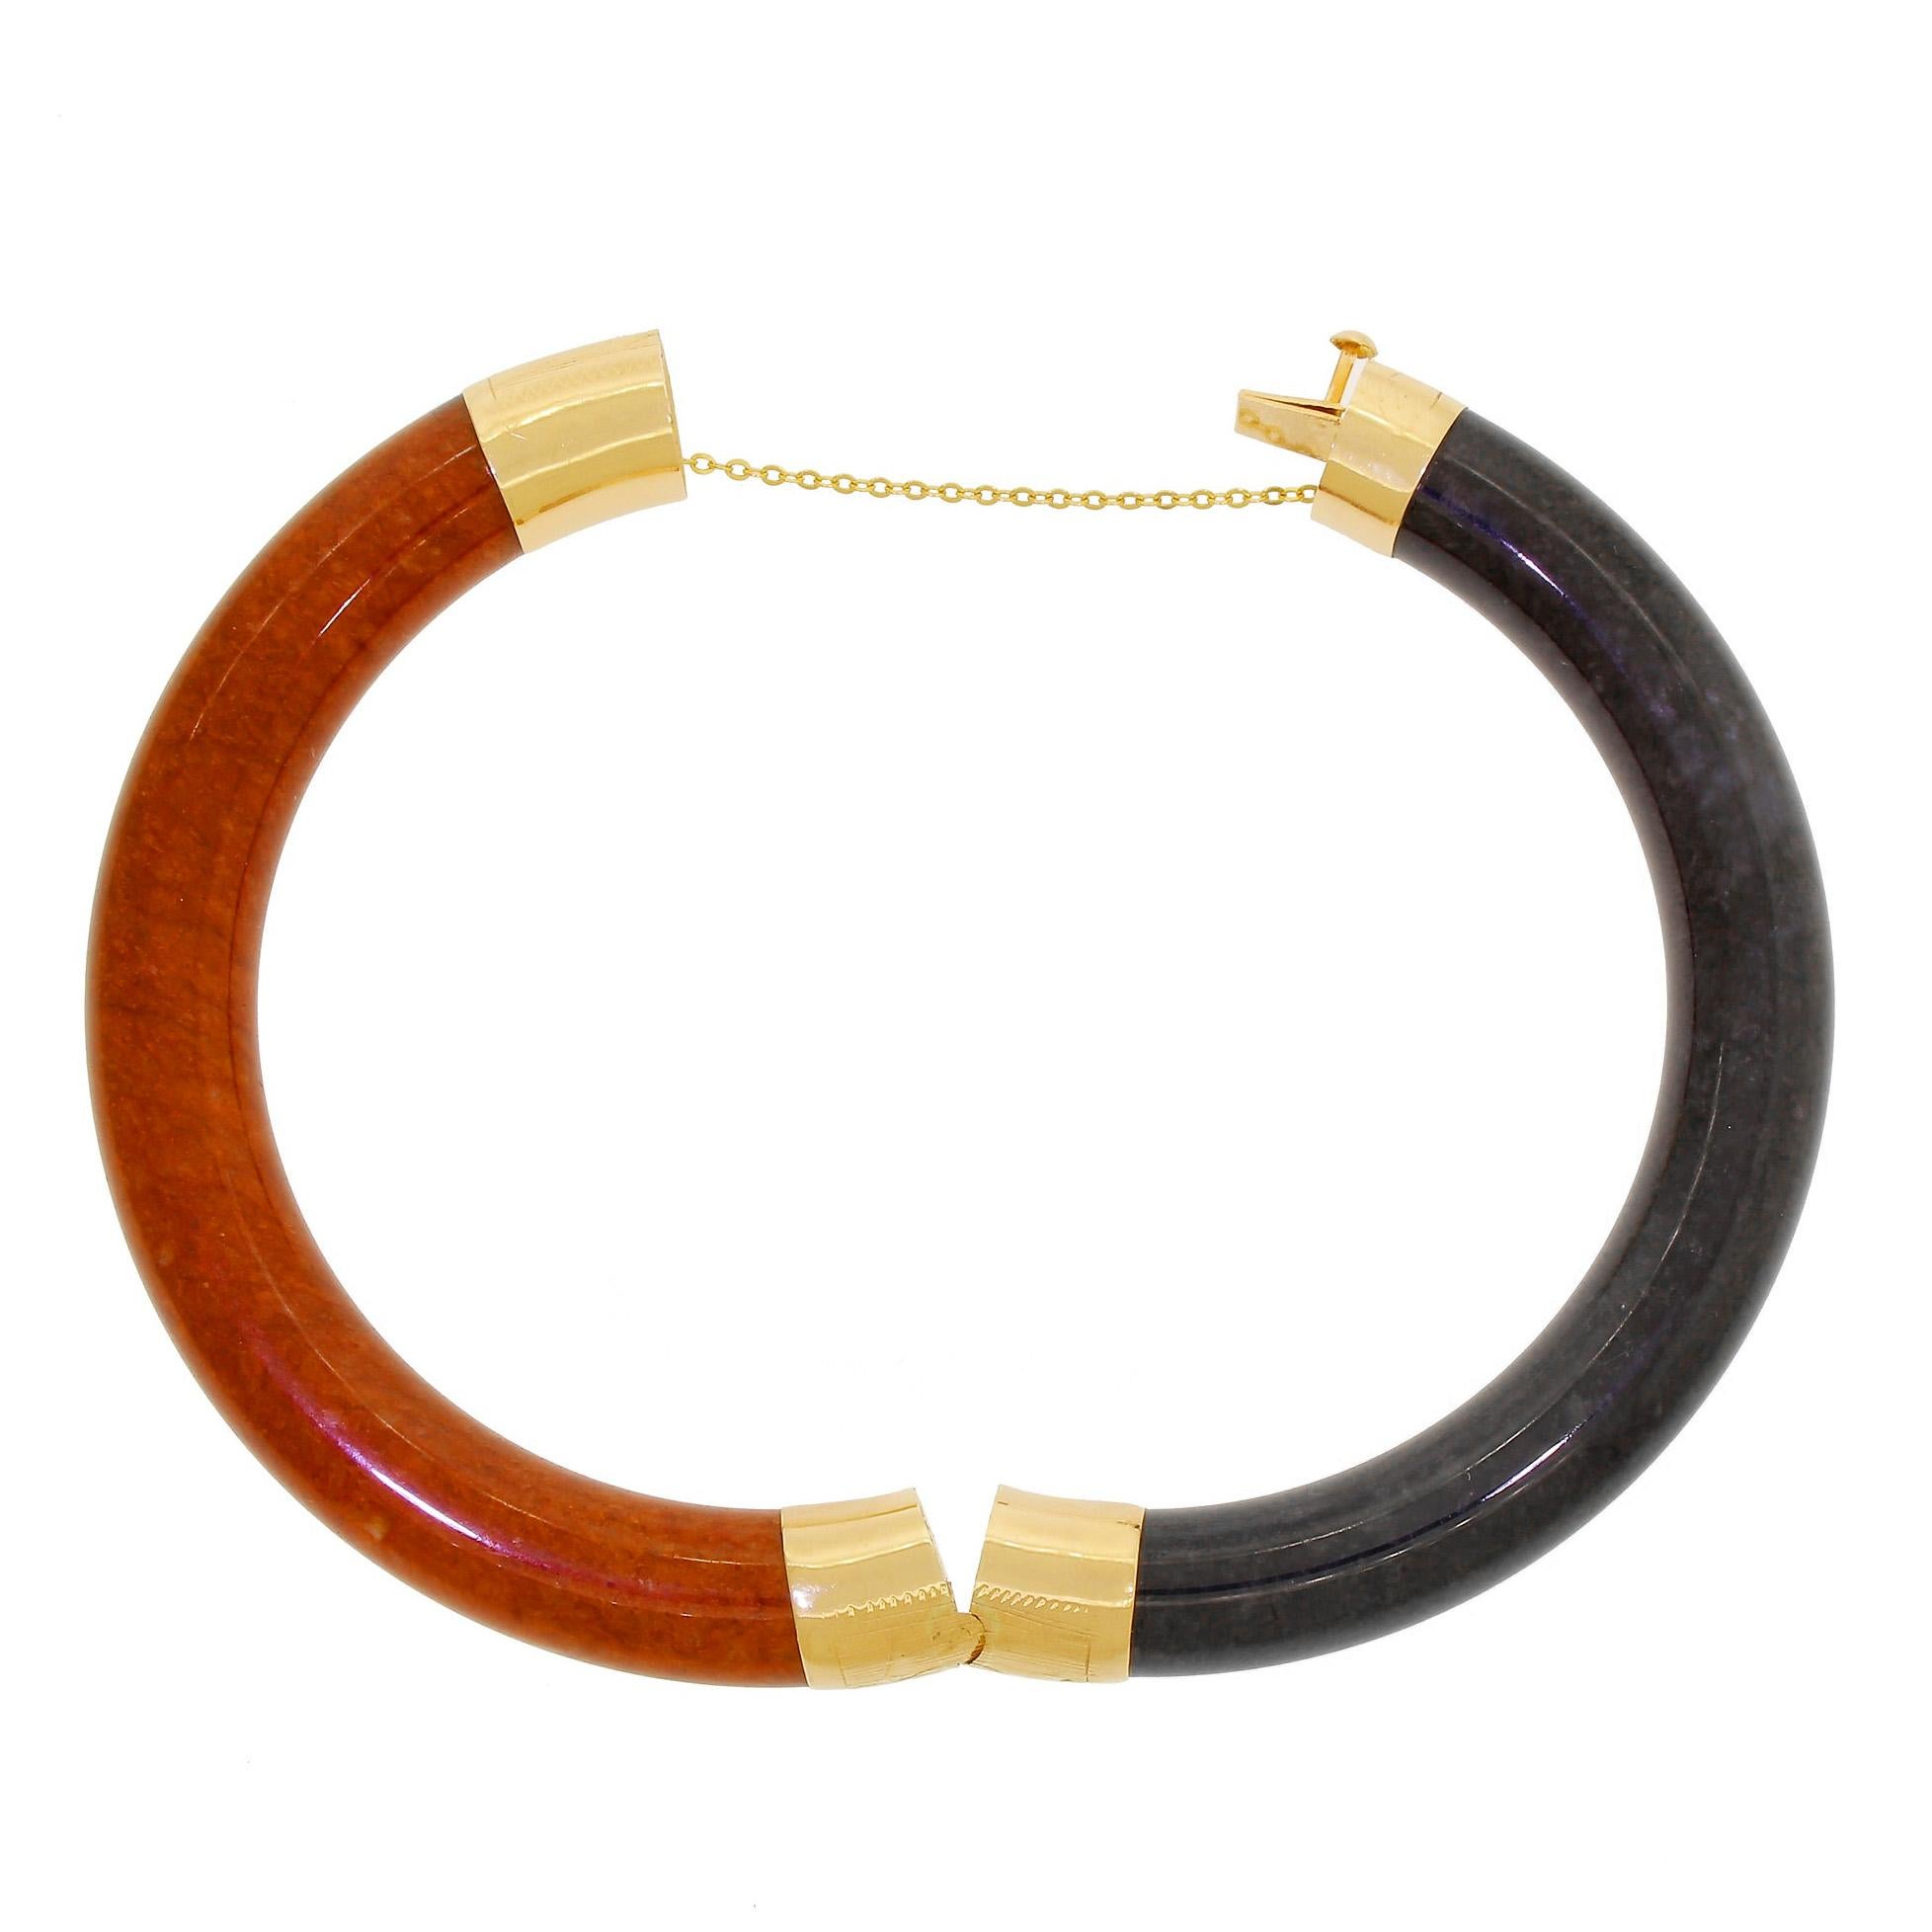 Vintage black & rust jade thick tube bangle bracelet with 14K yellow gold decorative engraved hinges and closure.
The tube varies slightly is size, between 9.6 and 9.9mm in diameter.
There are no chips, cracks or repairs to note.
Interior diameter